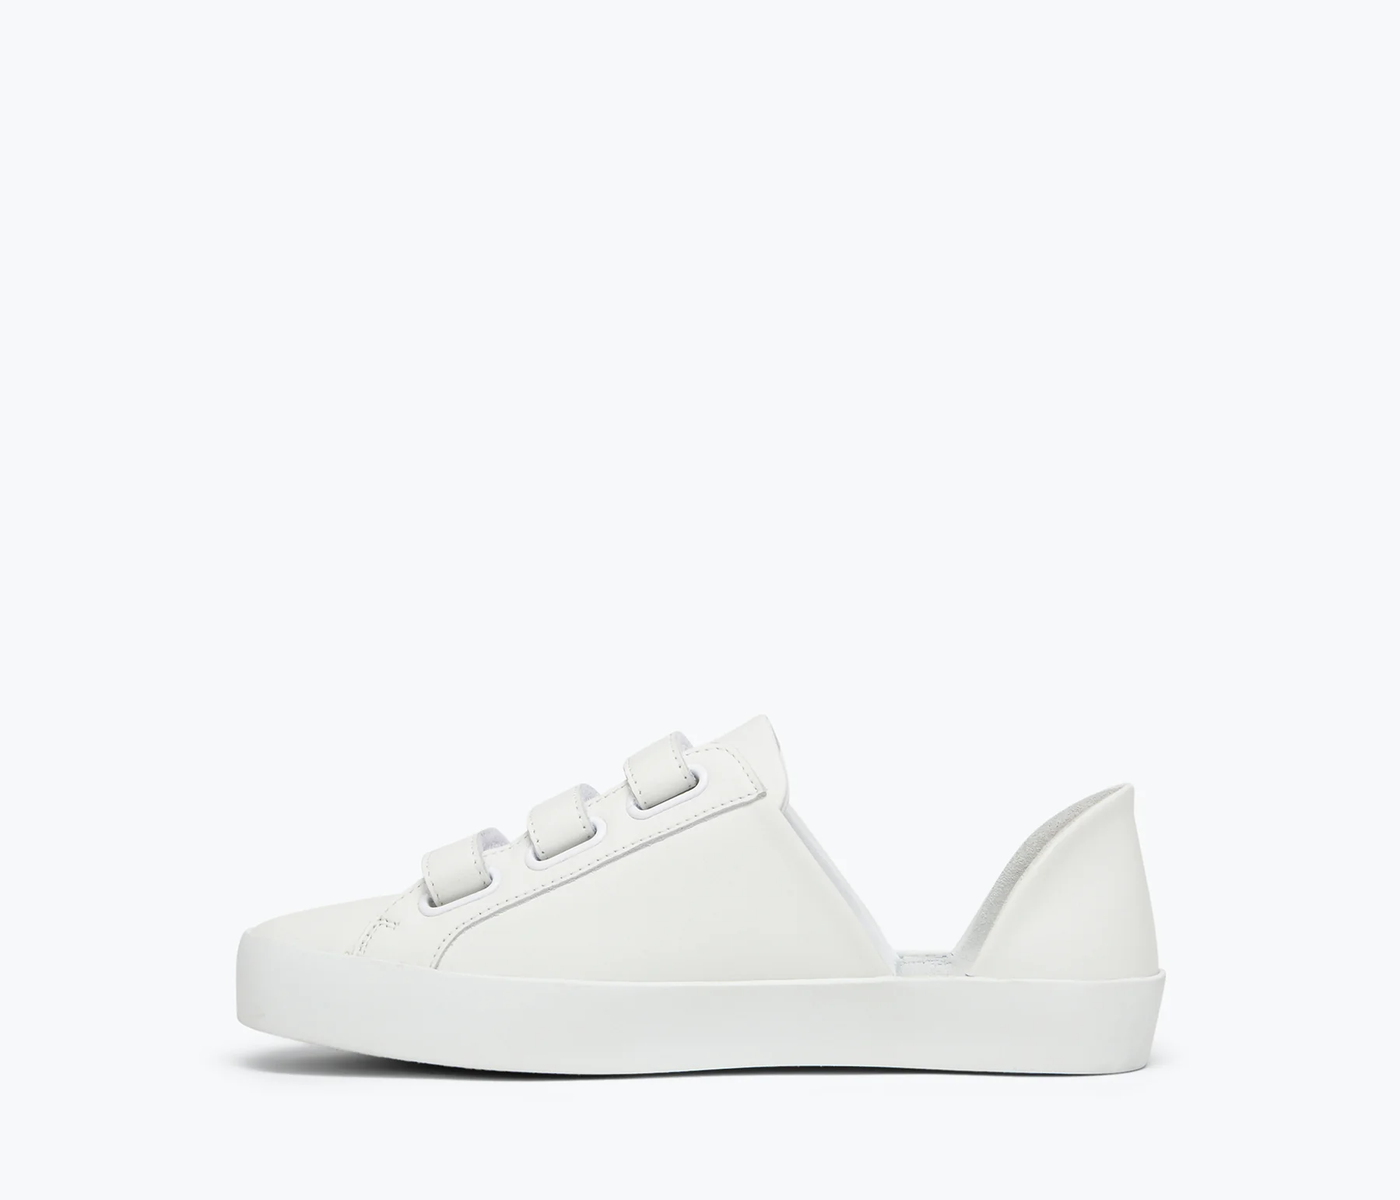 LIBBY D'ORSAY SNEAKER IN WHITE CALF - Romi Boutique